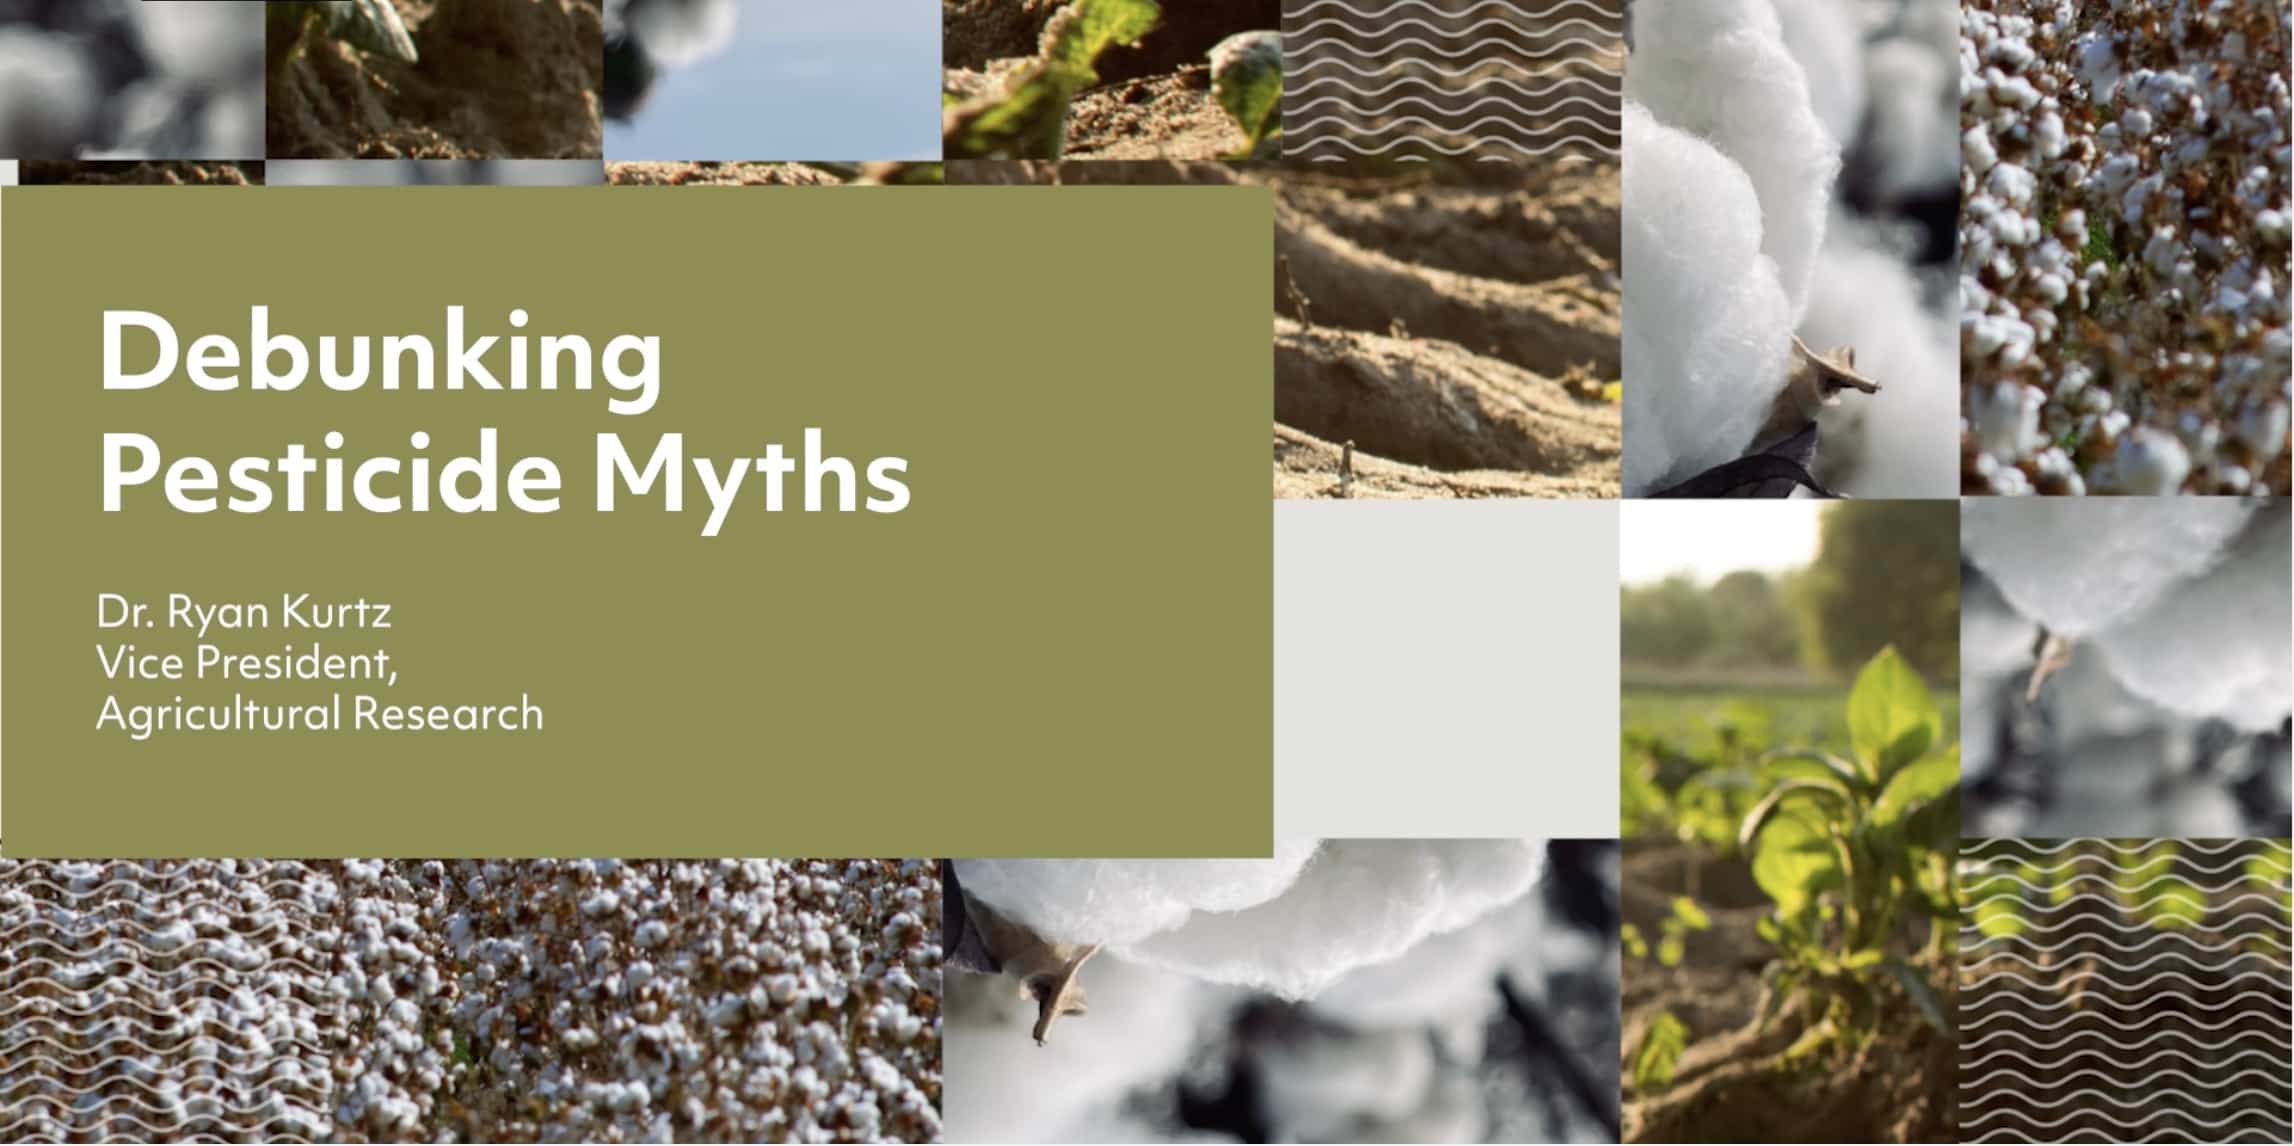 Debunking Pesticide Myths with Dr. Ryan Kurtz, Vice President or Agricultural Research at Cotton Inc.